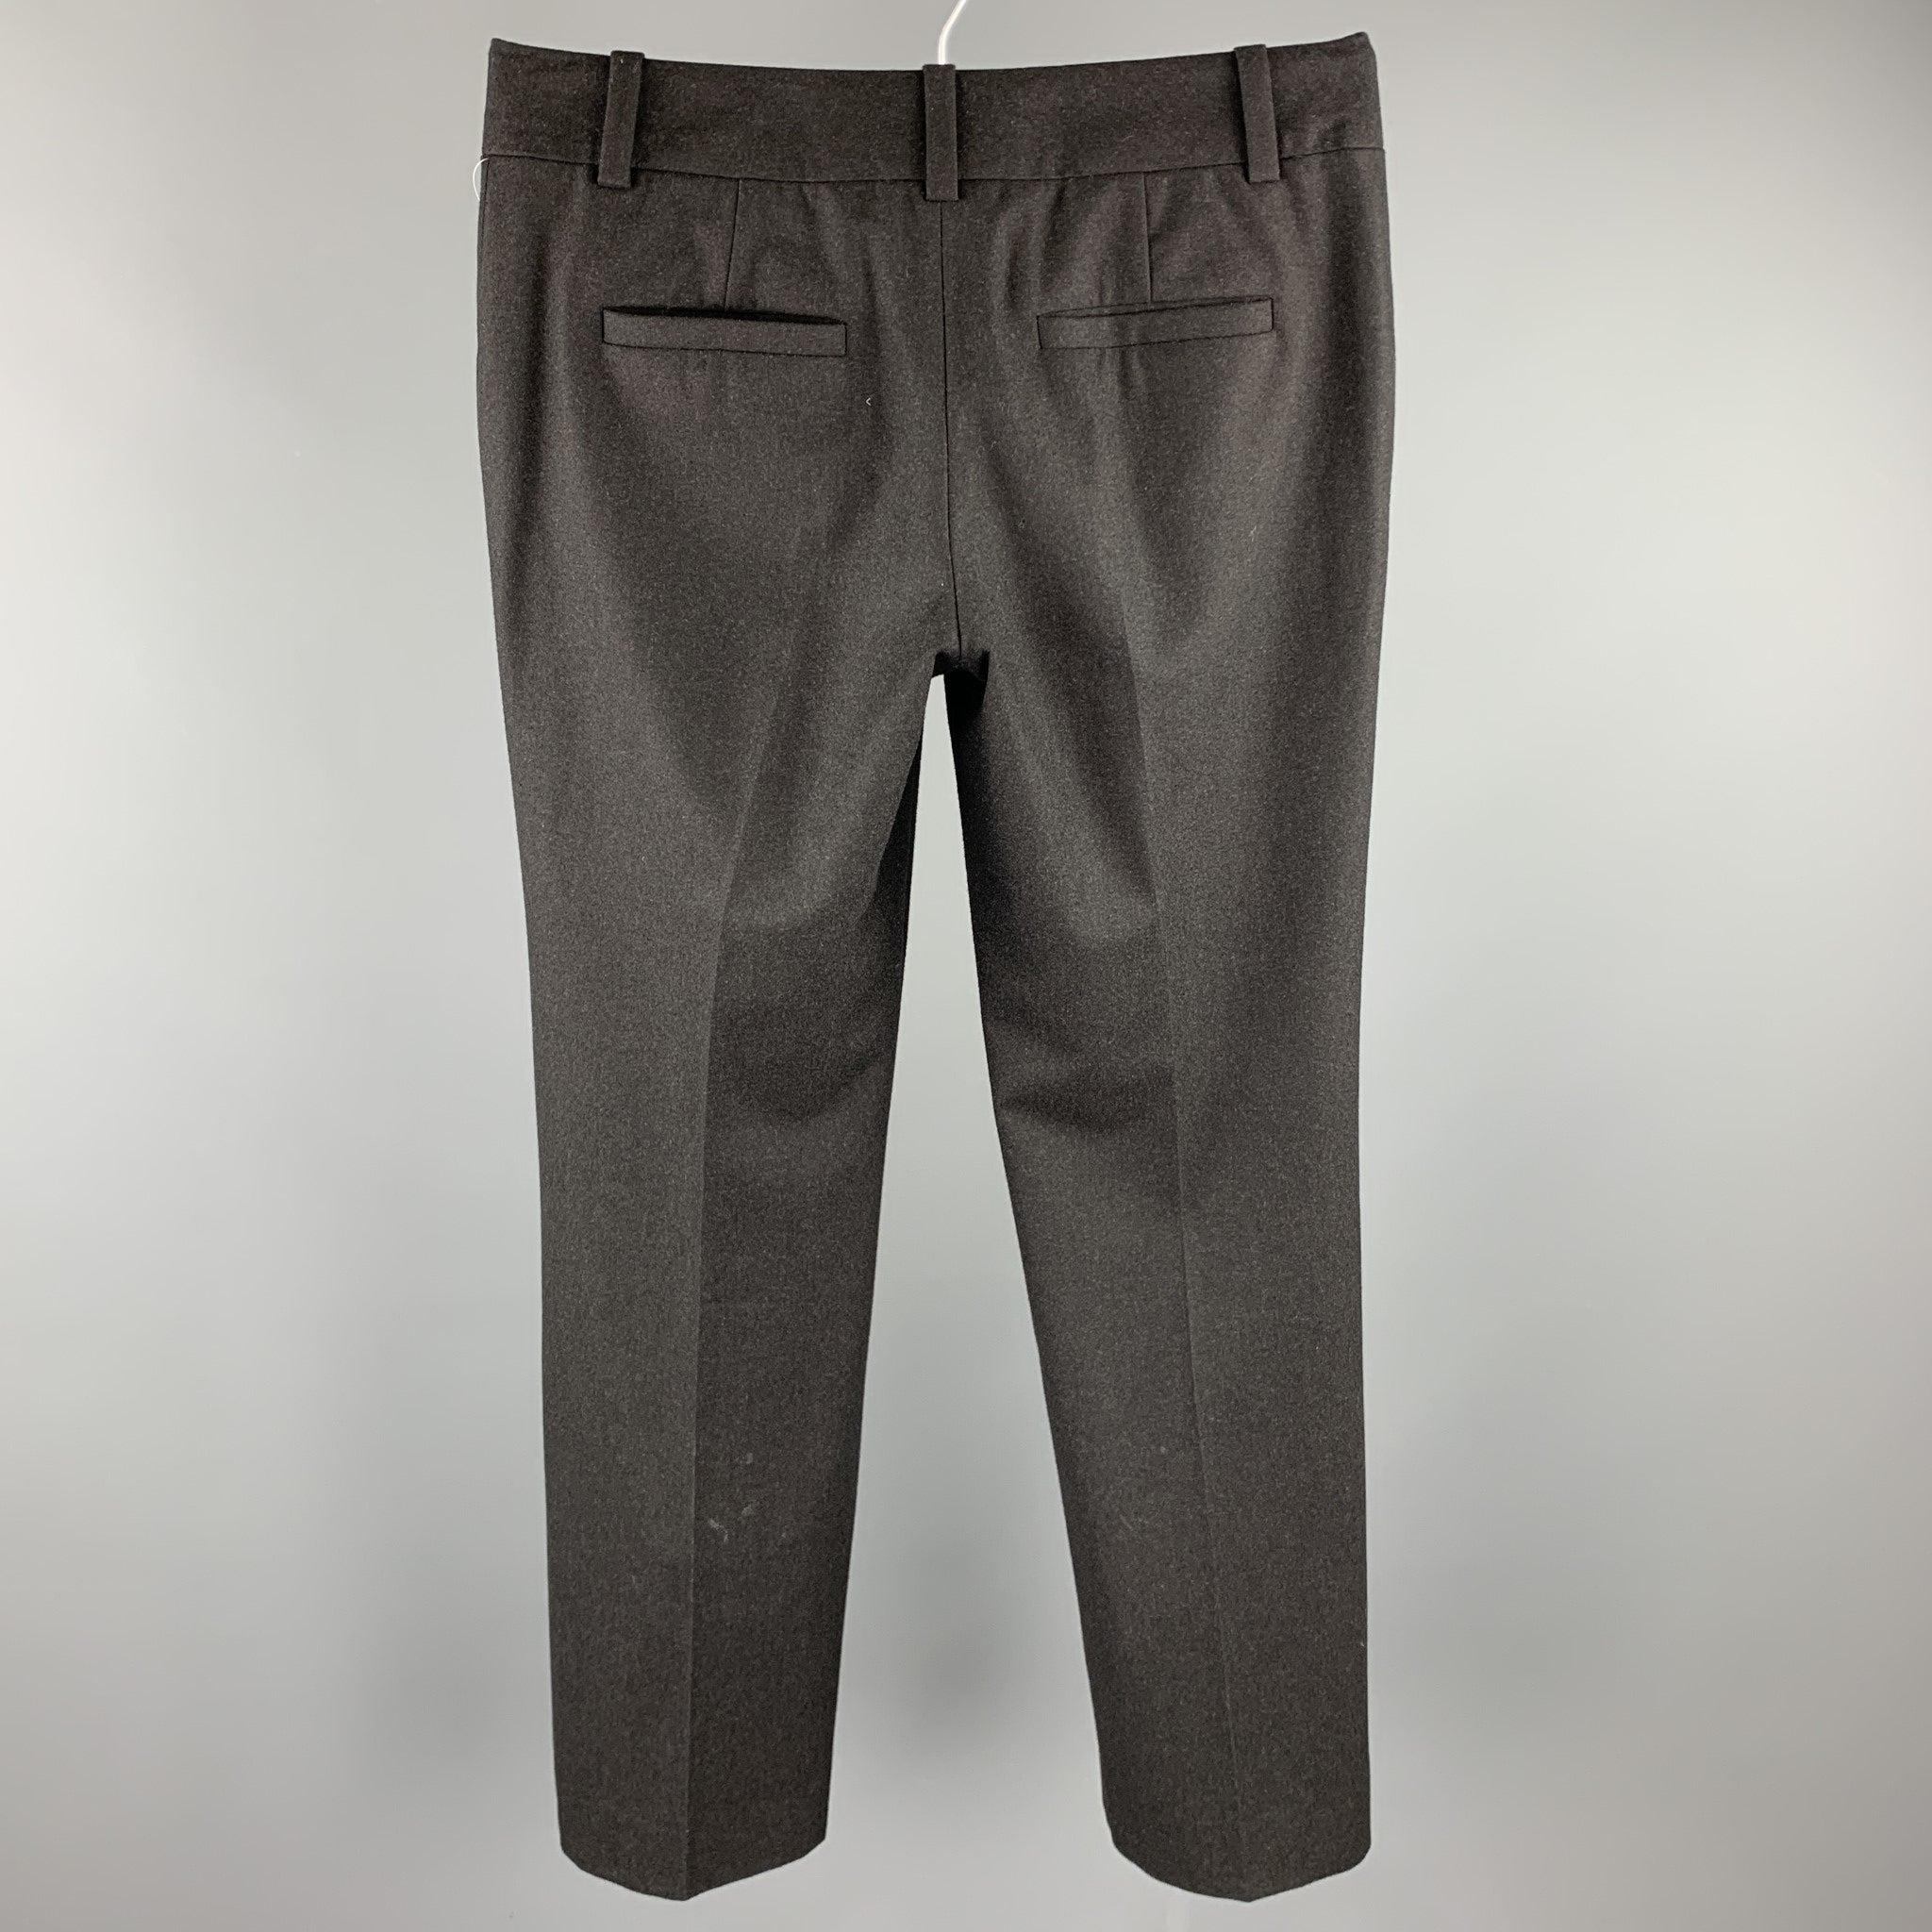 CELINE Size 4 Charcoal Wool Wide Leg Dress Pants In Good Condition For Sale In San Francisco, CA